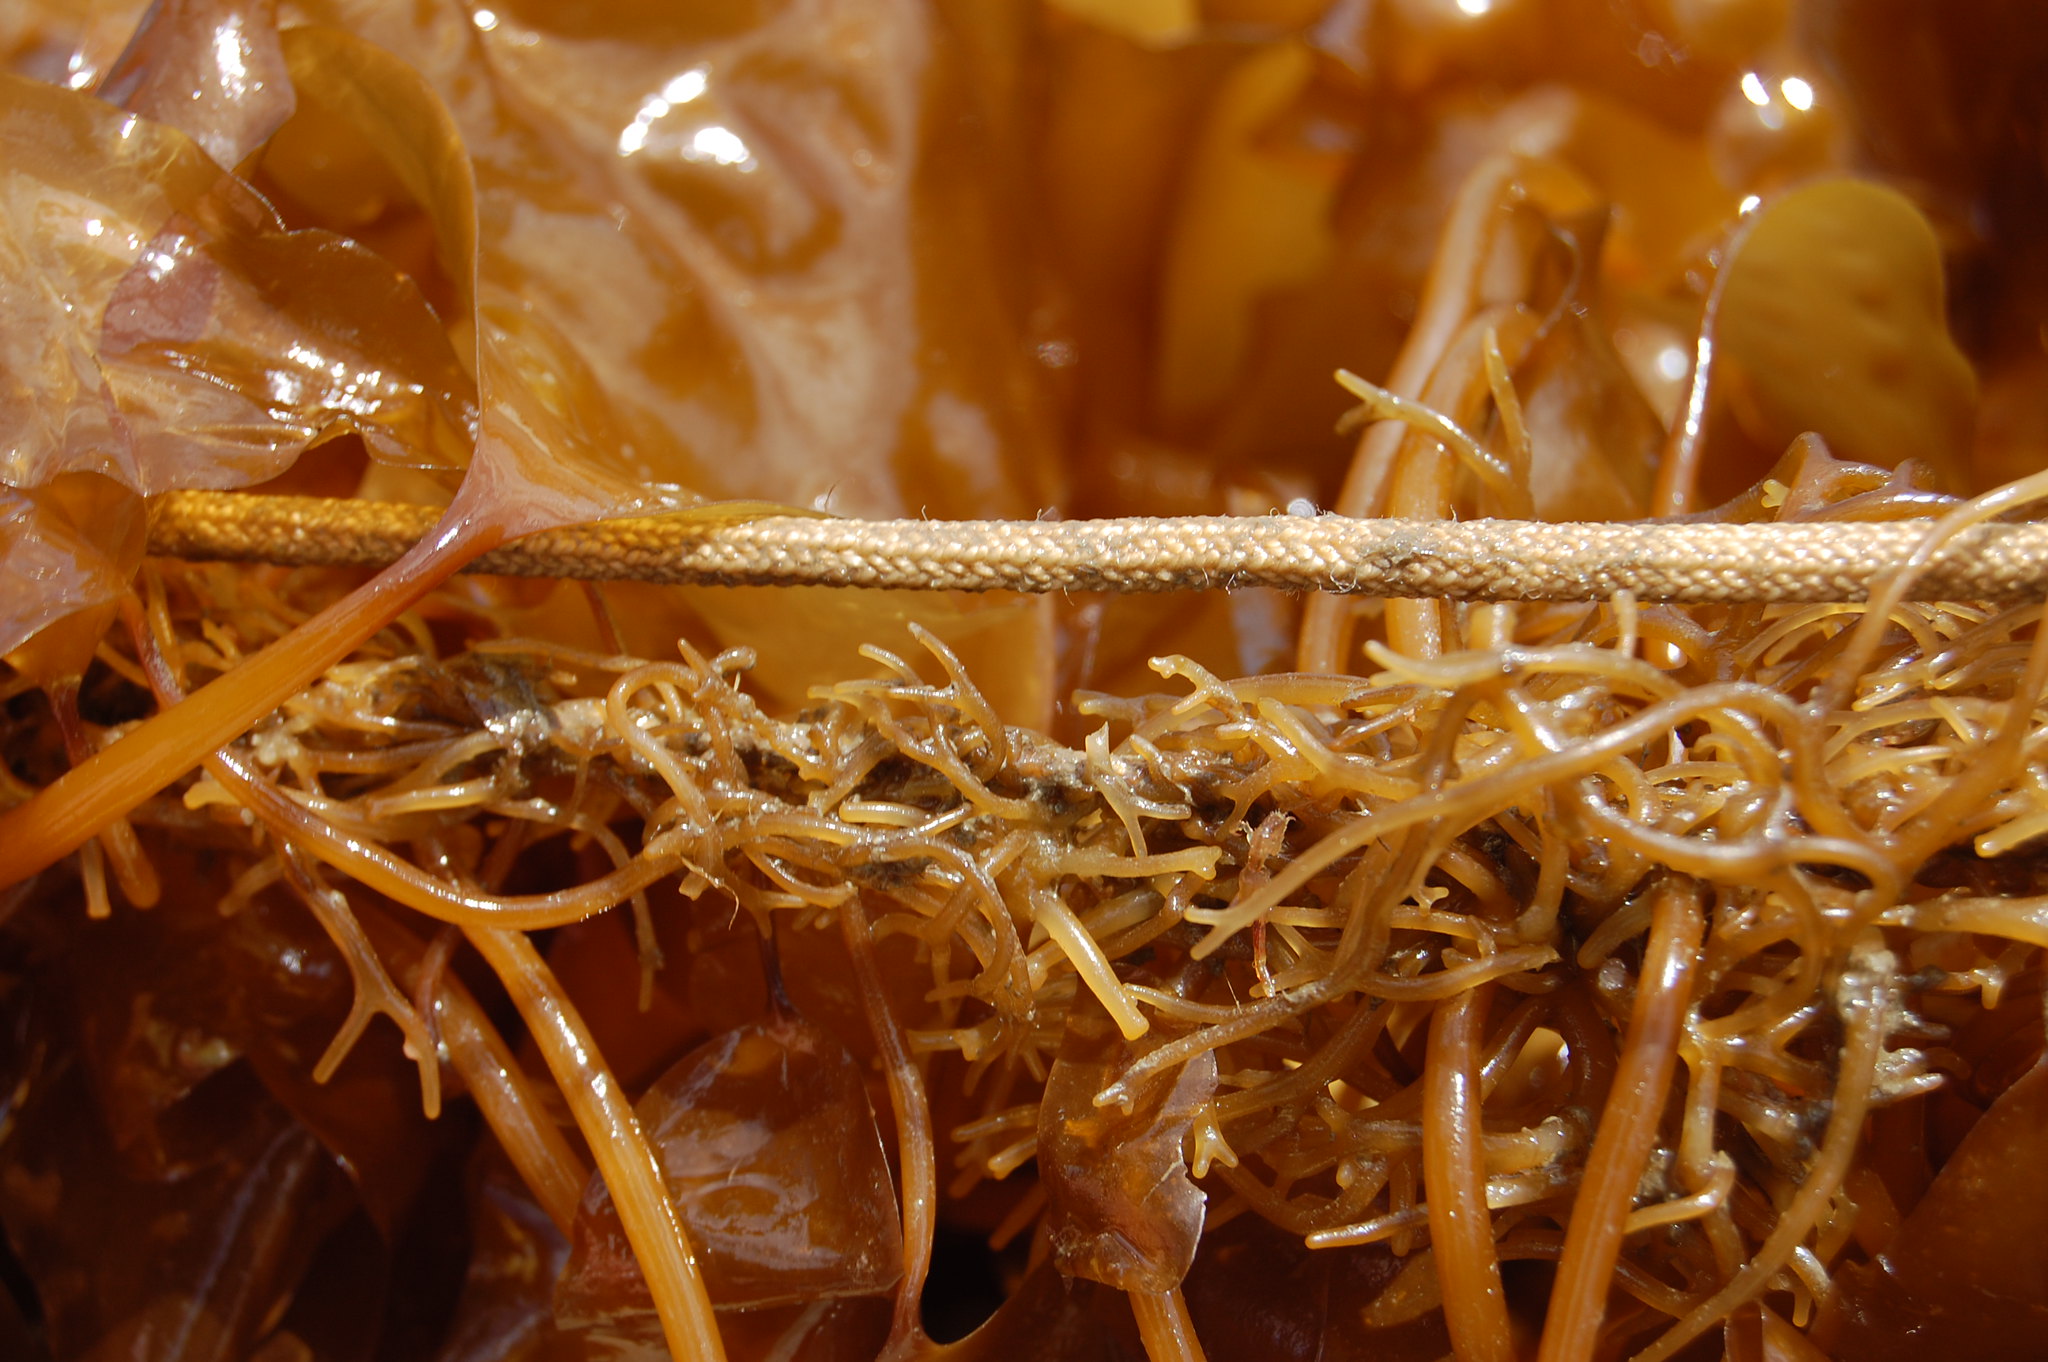 close up of a role and brown seaweed